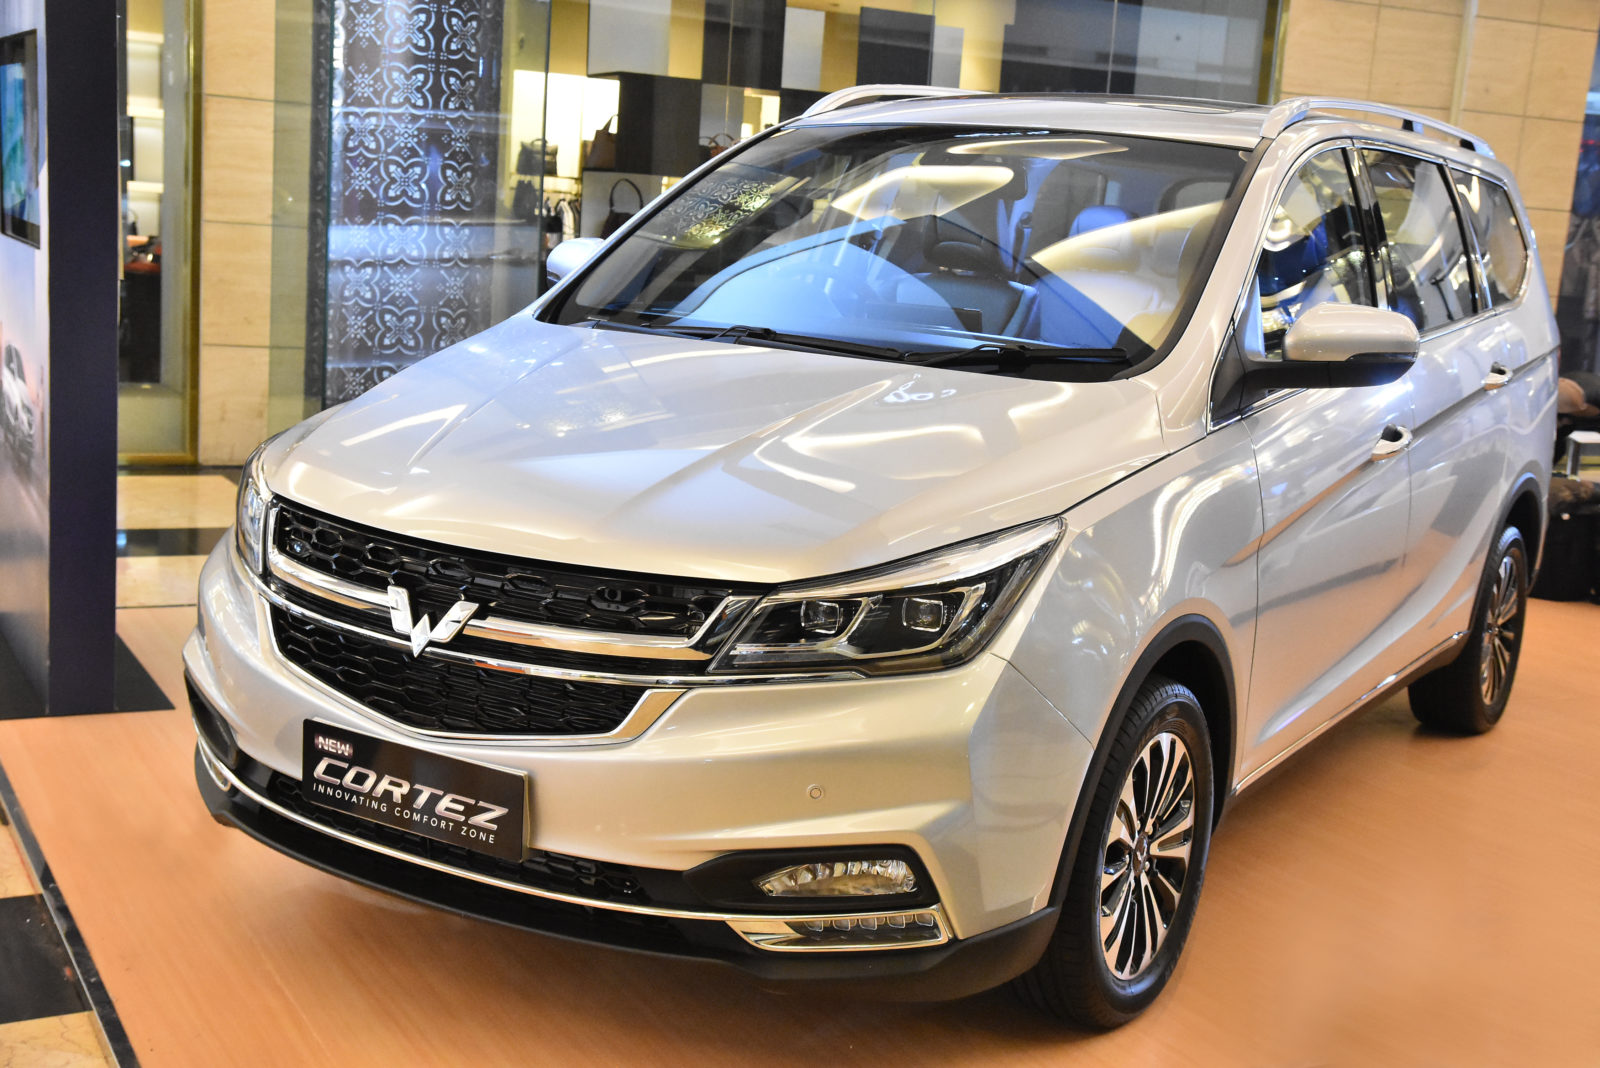 Image Wuling Officially Introduced New Cortez in Bandung